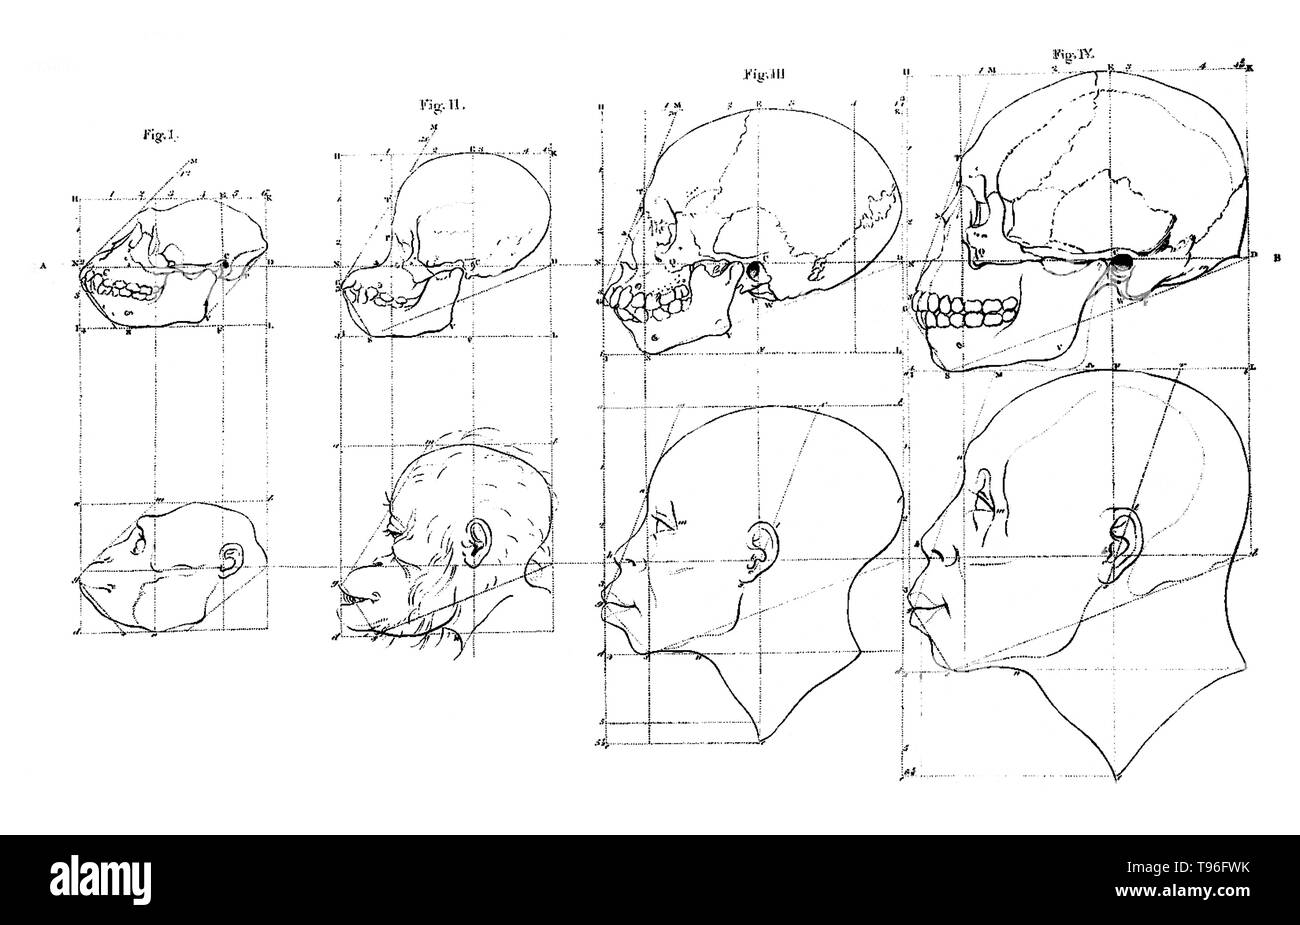 The second canvas had the heads of two apes, an African Moor and a Kalmyk or Asian, again with their skulls drawn above them. Facial Angles refers to the content of two lectures by Petrus Camper on August 1st and 8th in 1770 to the Amsterdam Drawing Academy. Camper's main points in his first lecture were that classical drawing lessons  were based on an incorrect assumption that the human head was oval at all ages. Stock Photo